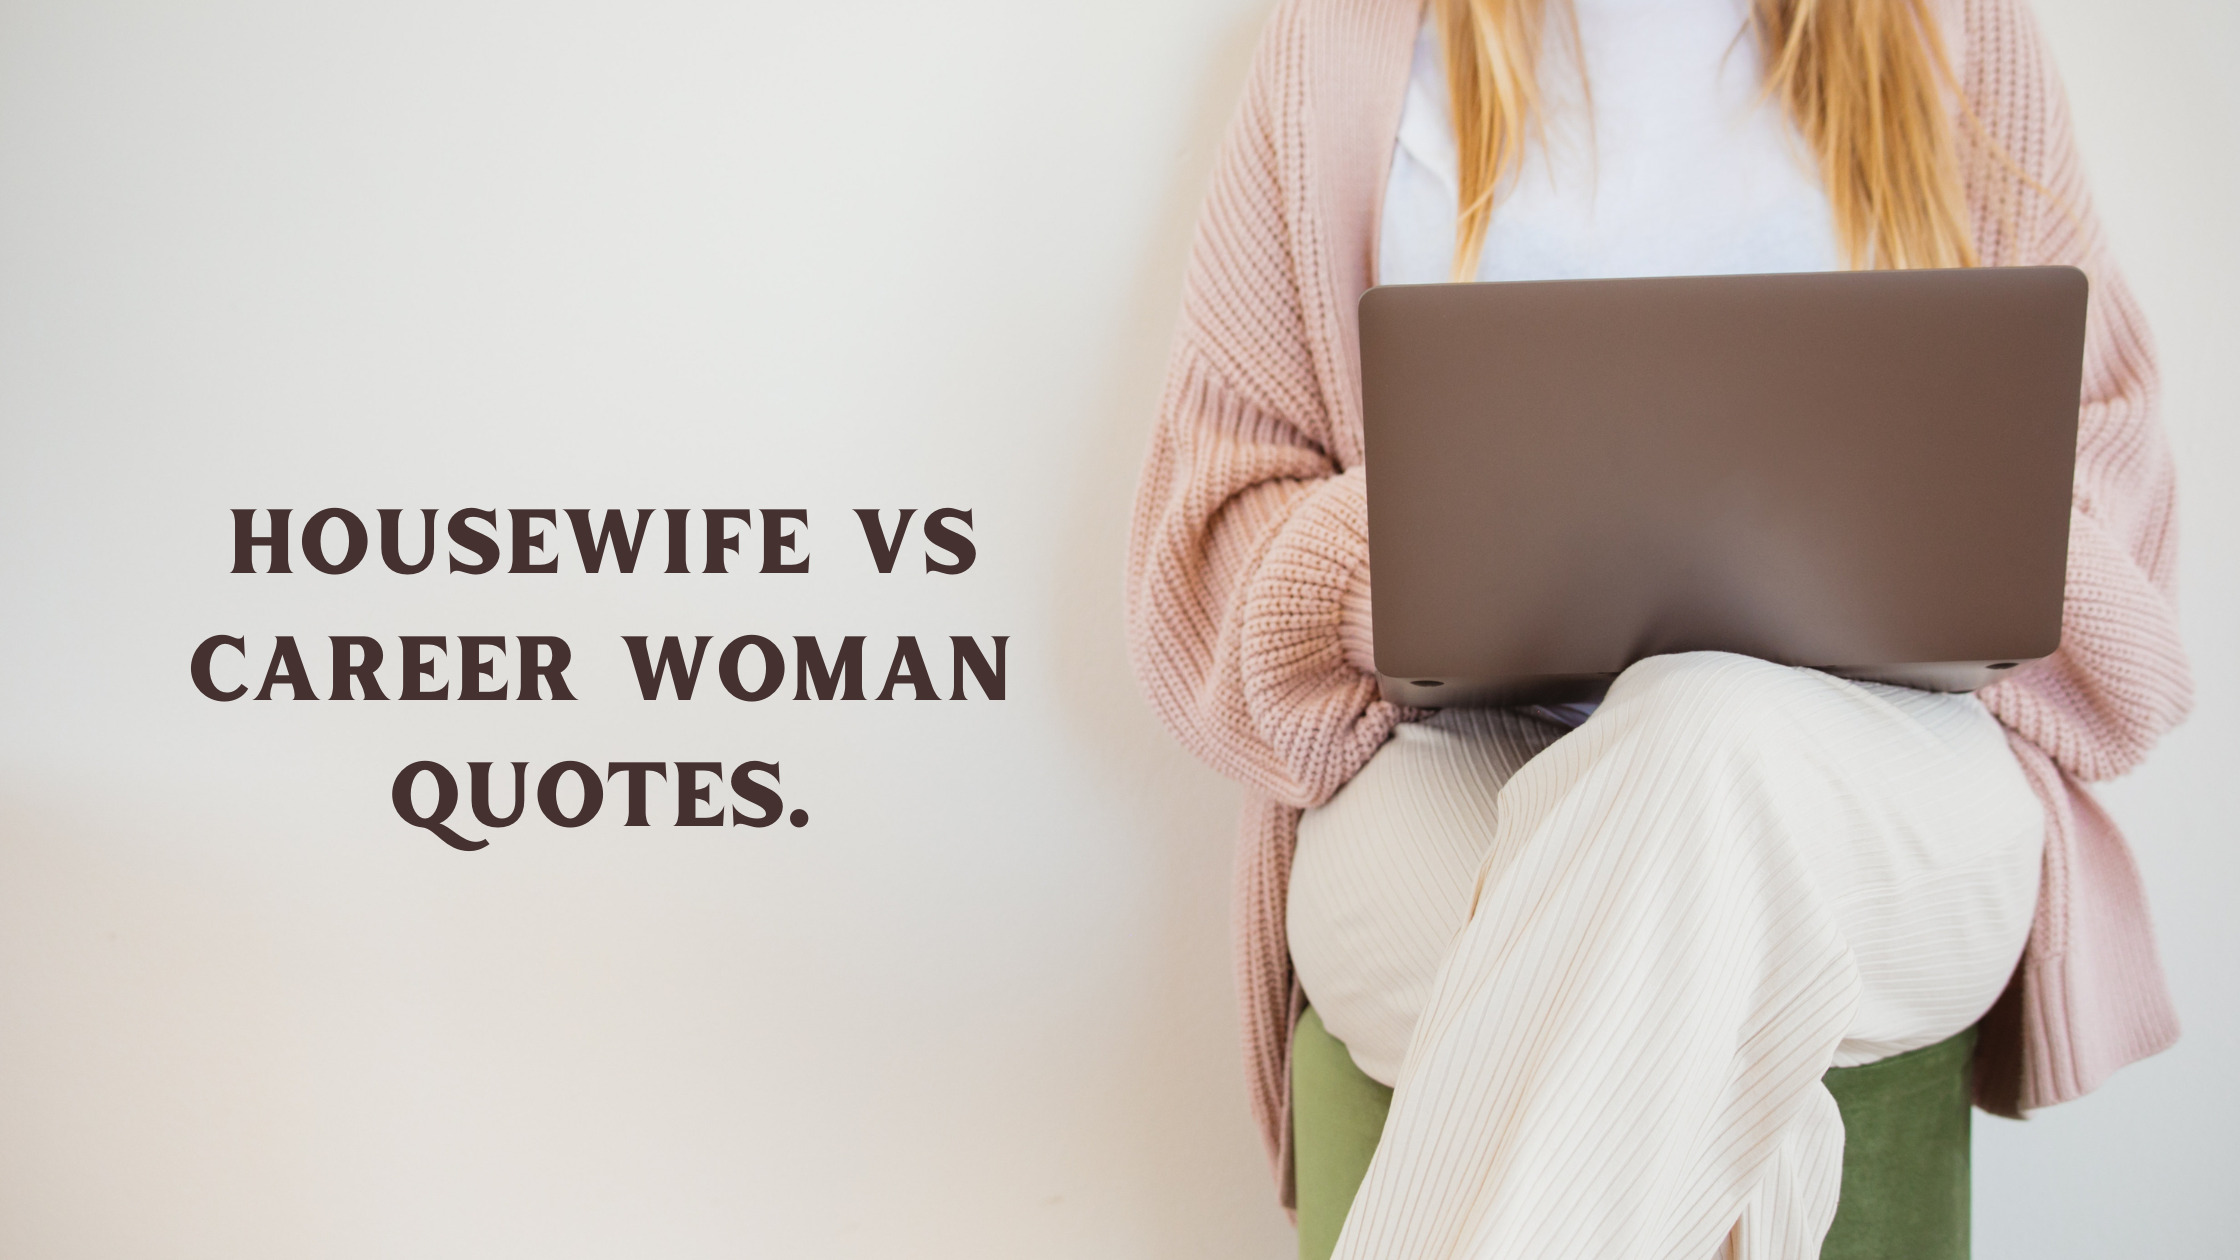 Housewife vs Career Woman Quotes